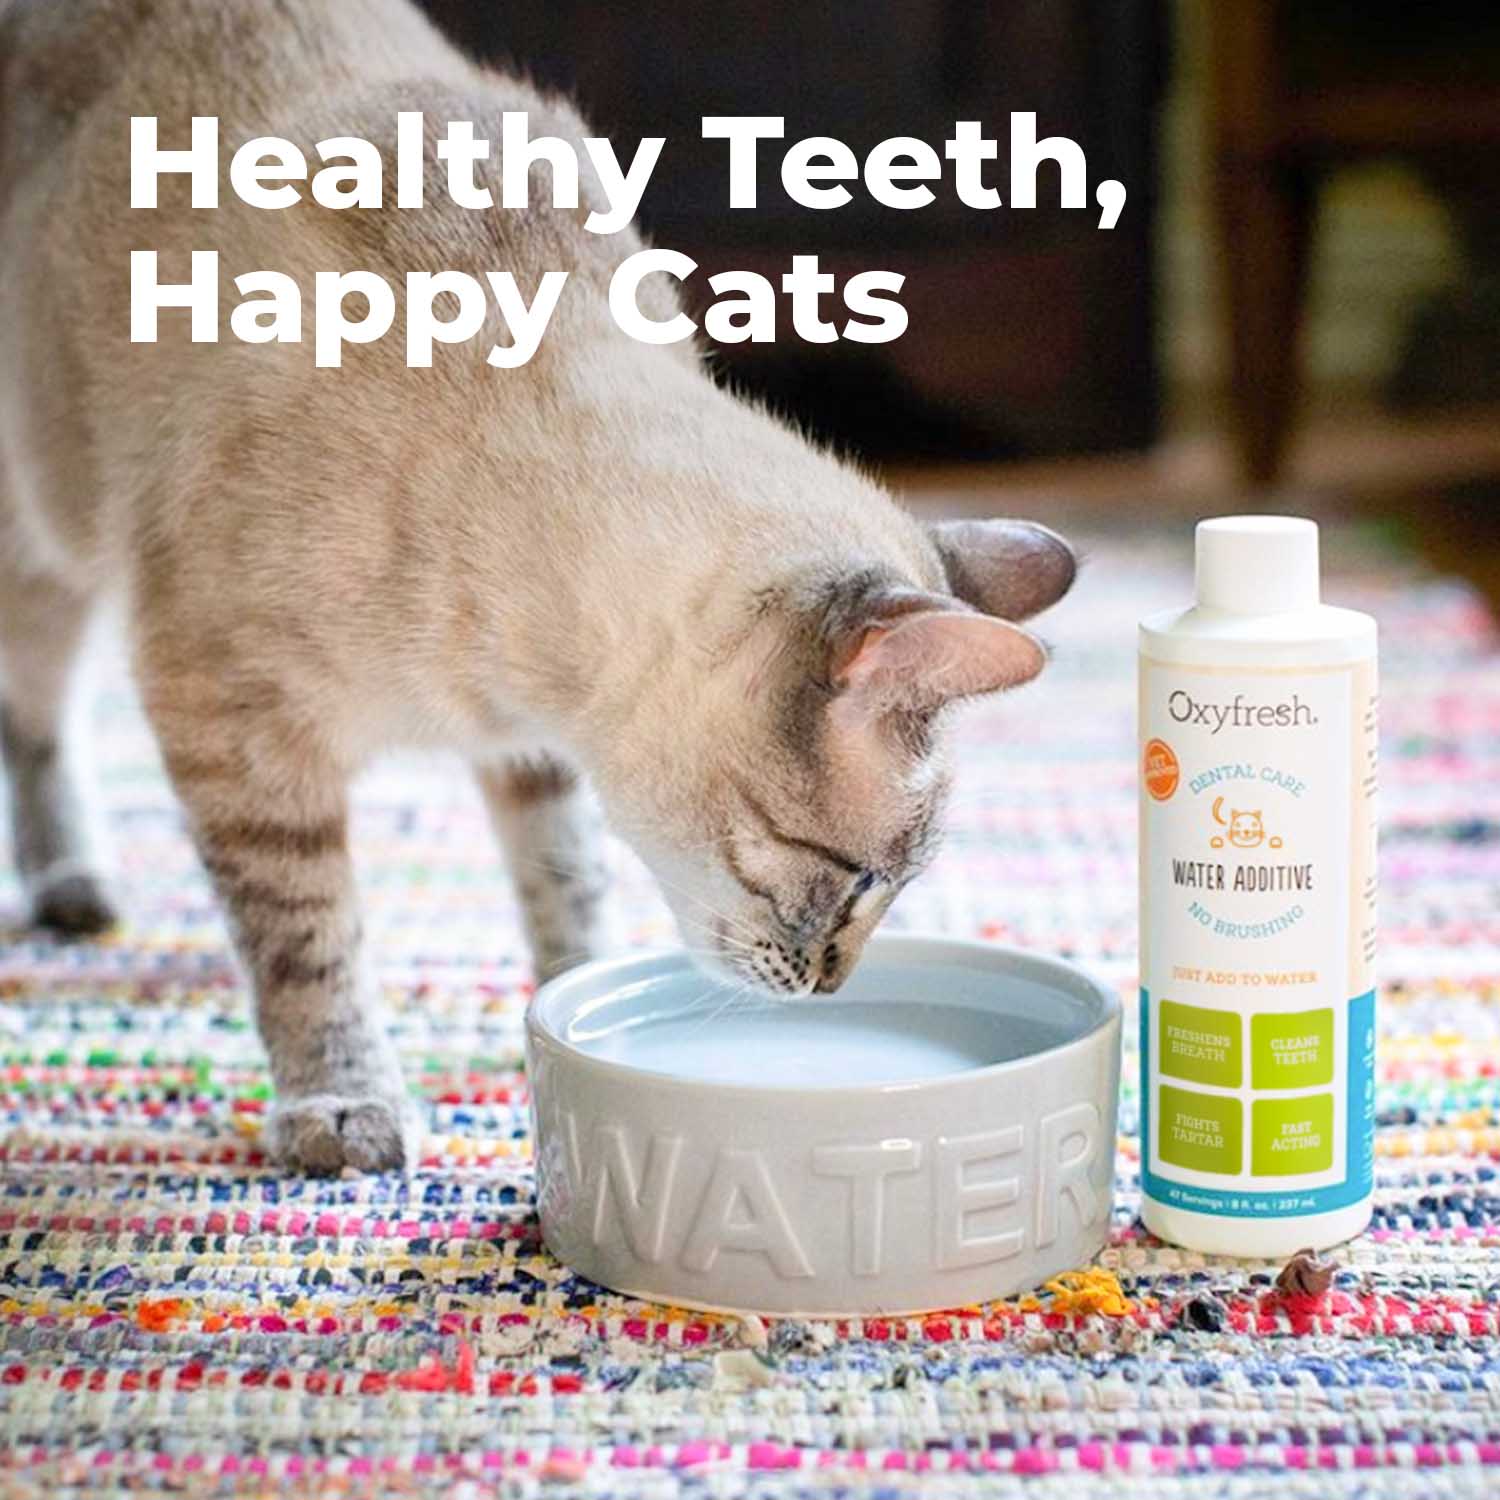 Oxyfresh cat water additive healthy teeth happy cats cat drinking water and additive for fresh cat breath